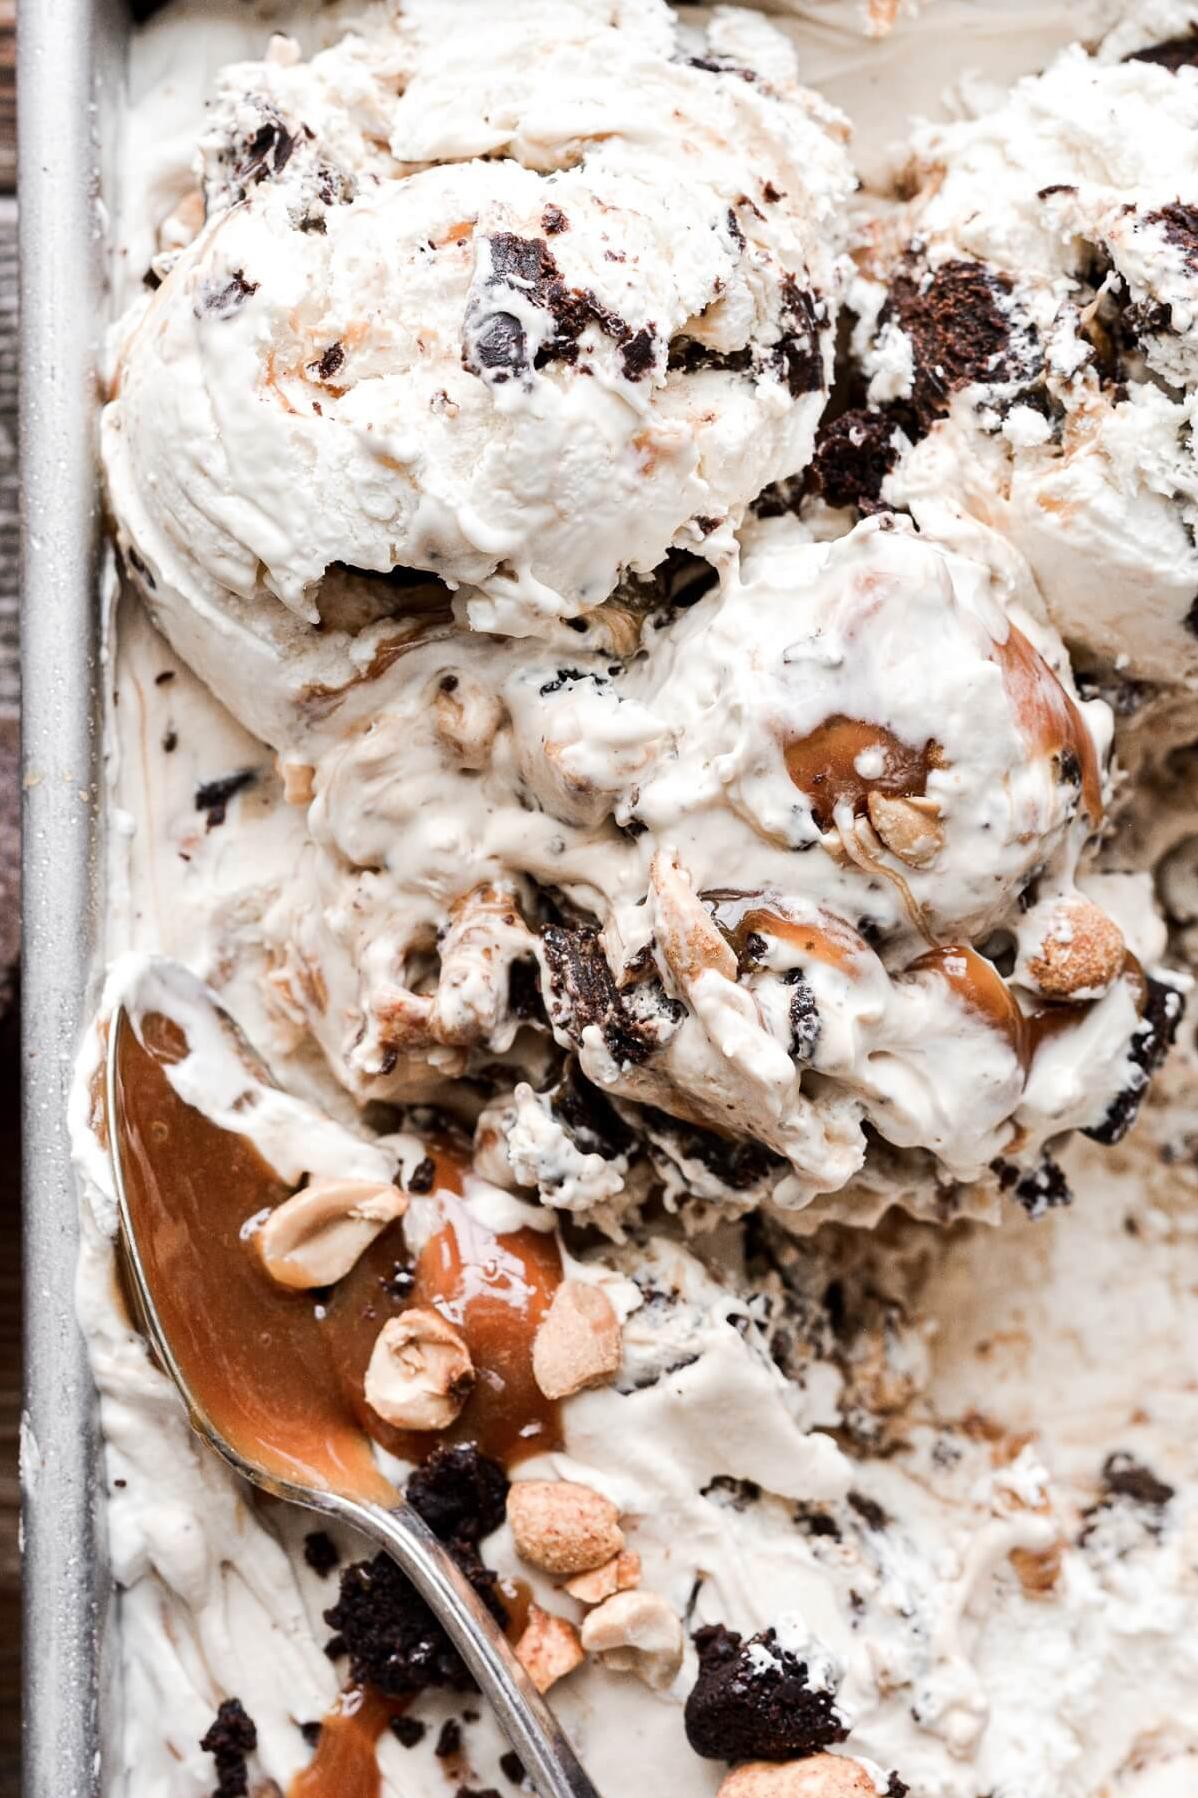  Add a dollop of whipped cream for an extra touch of decadence